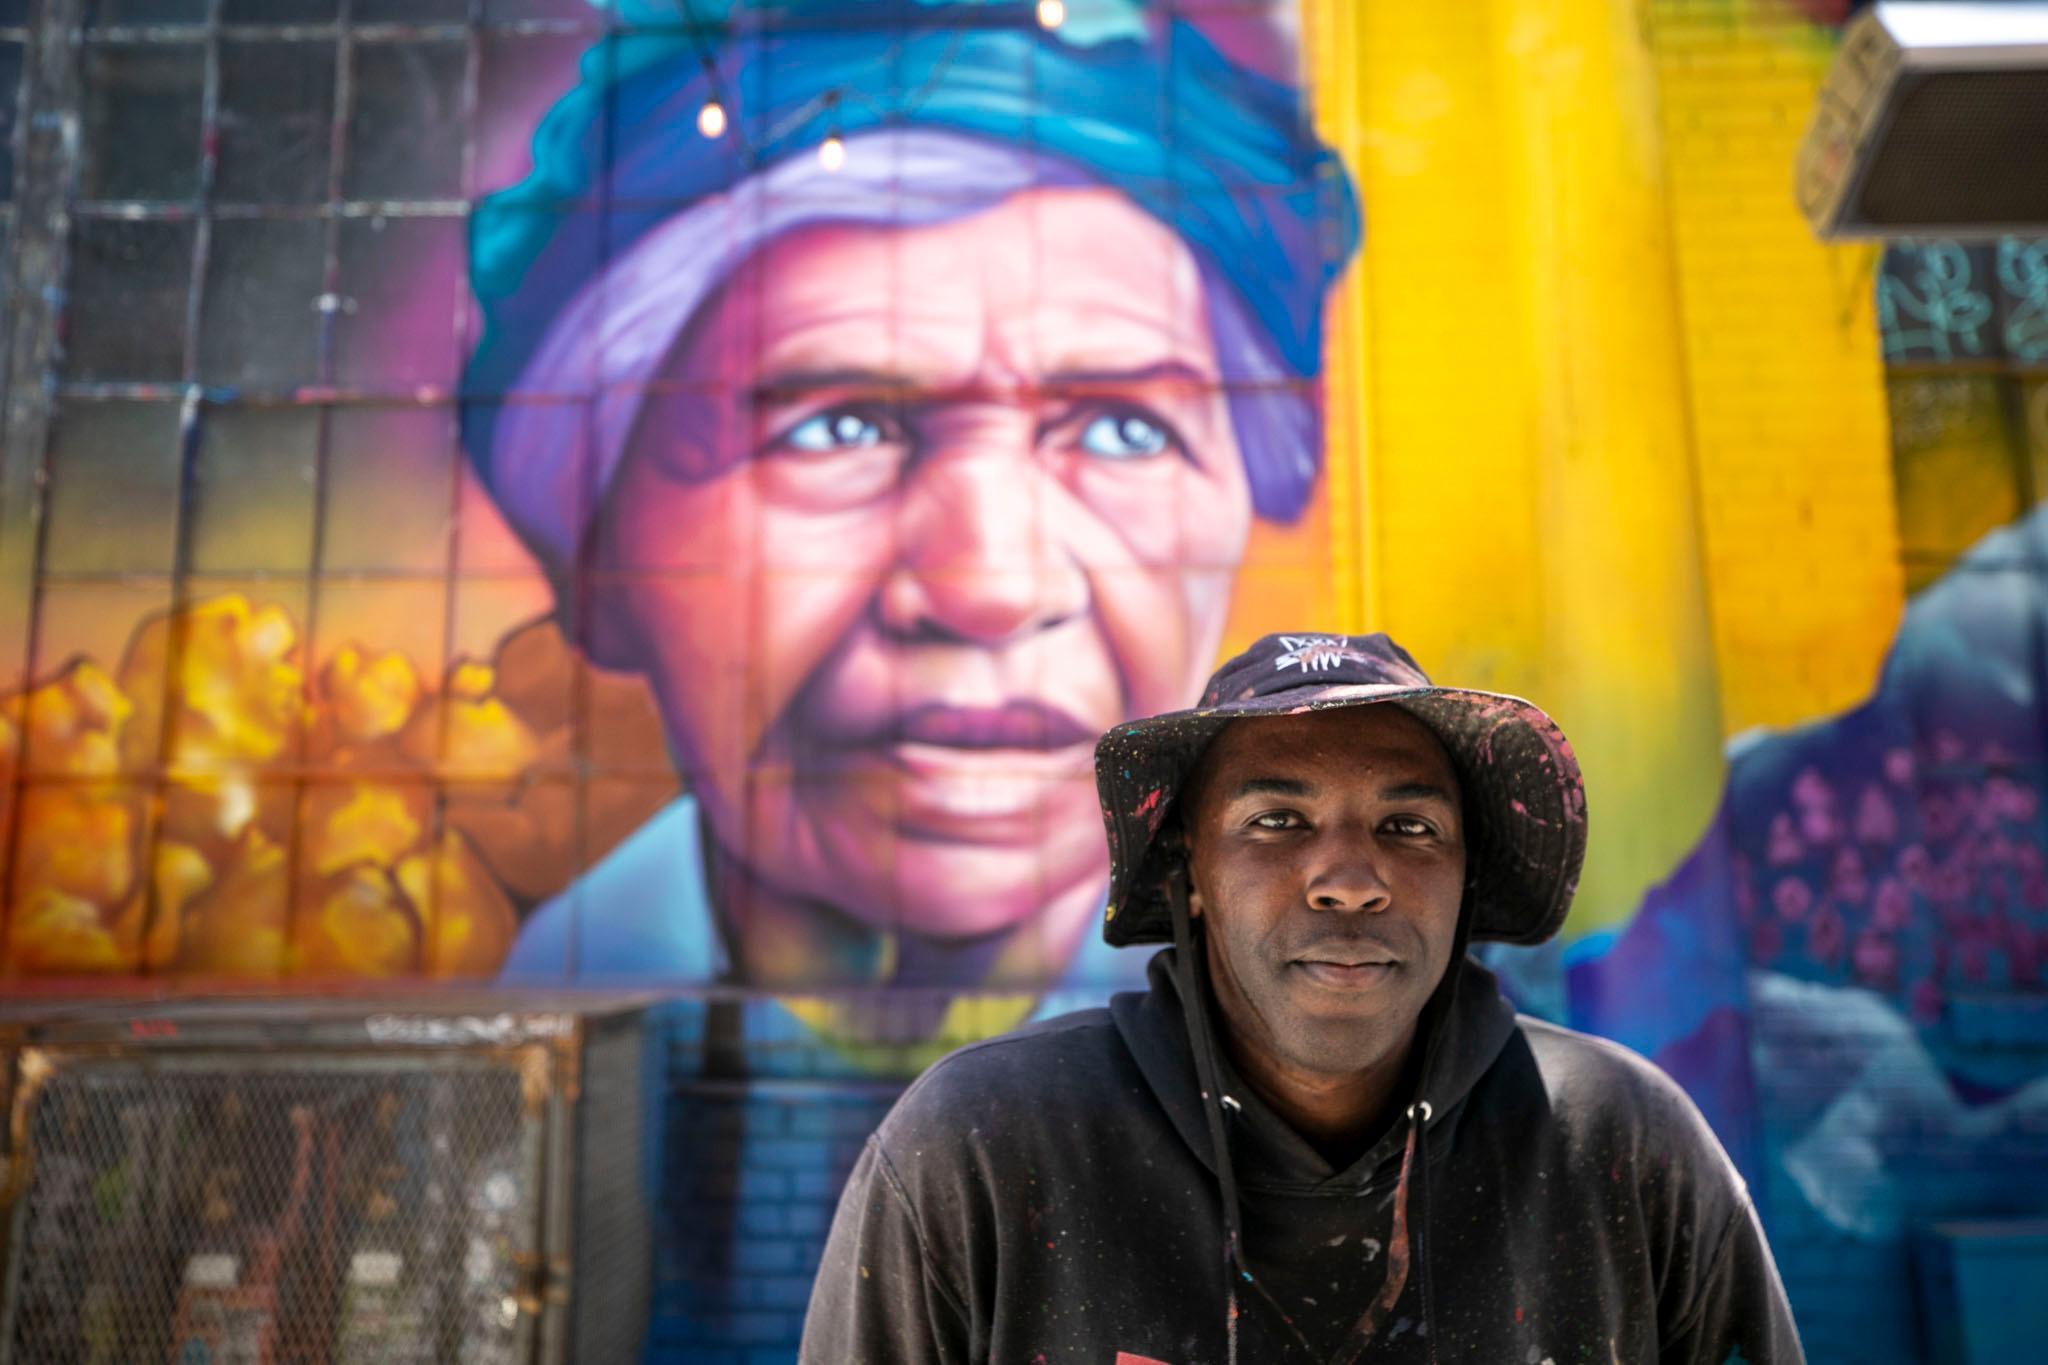 Artist Detour stands in front of a new mural he painted depicting depicts Clara Brown in vibrant colors